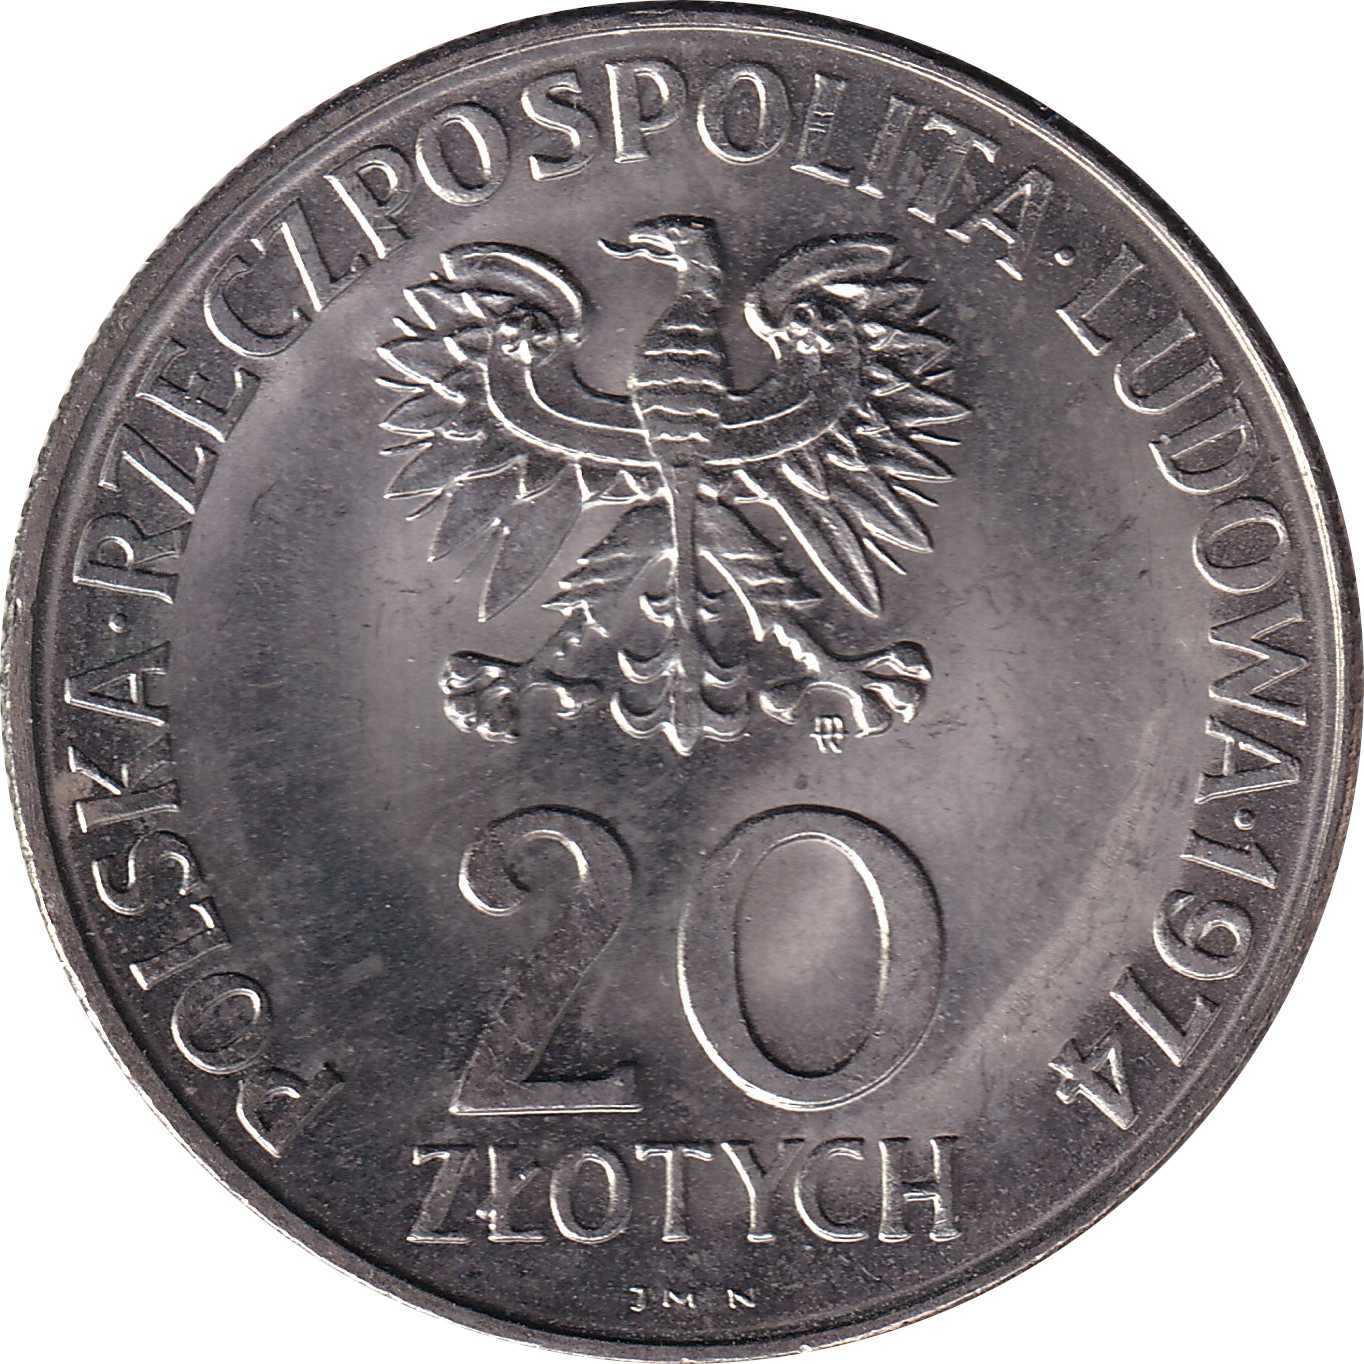 20 zlotych - Comcon - 25 ans